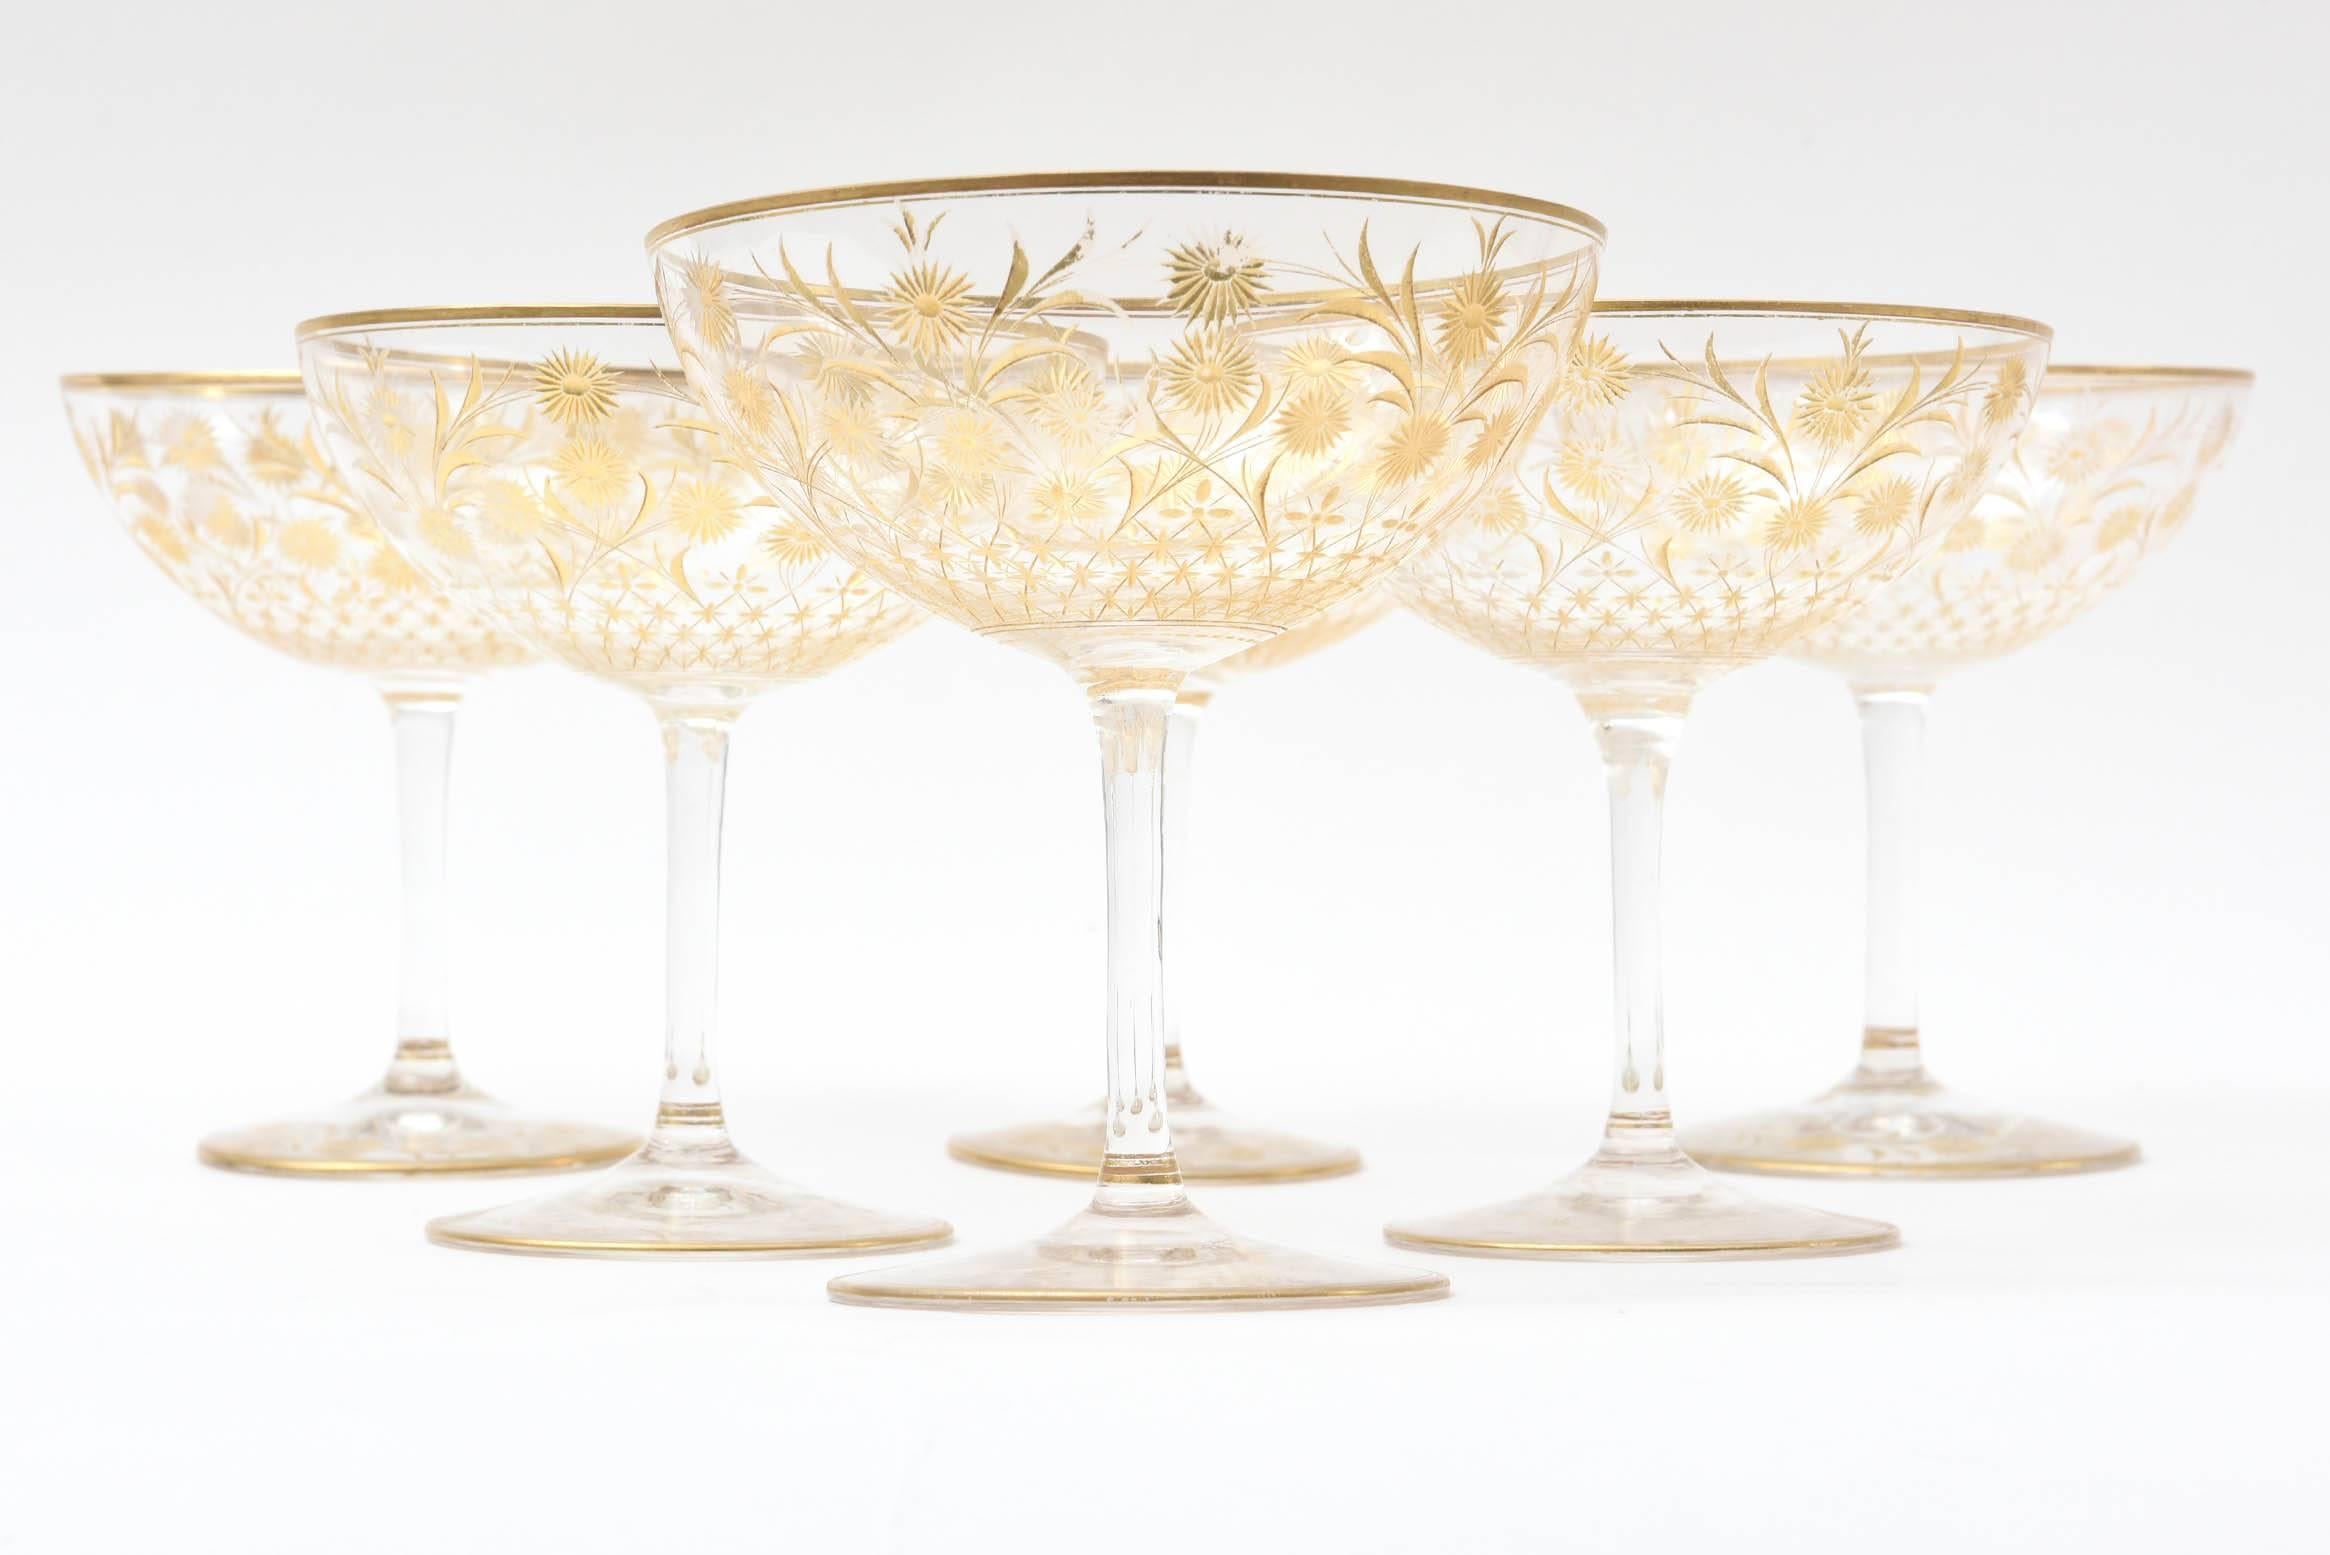 Late 19th Century 6 Antique Champagne Coupes, 19th Century Moser, Wheel Cut and Hand Gilded